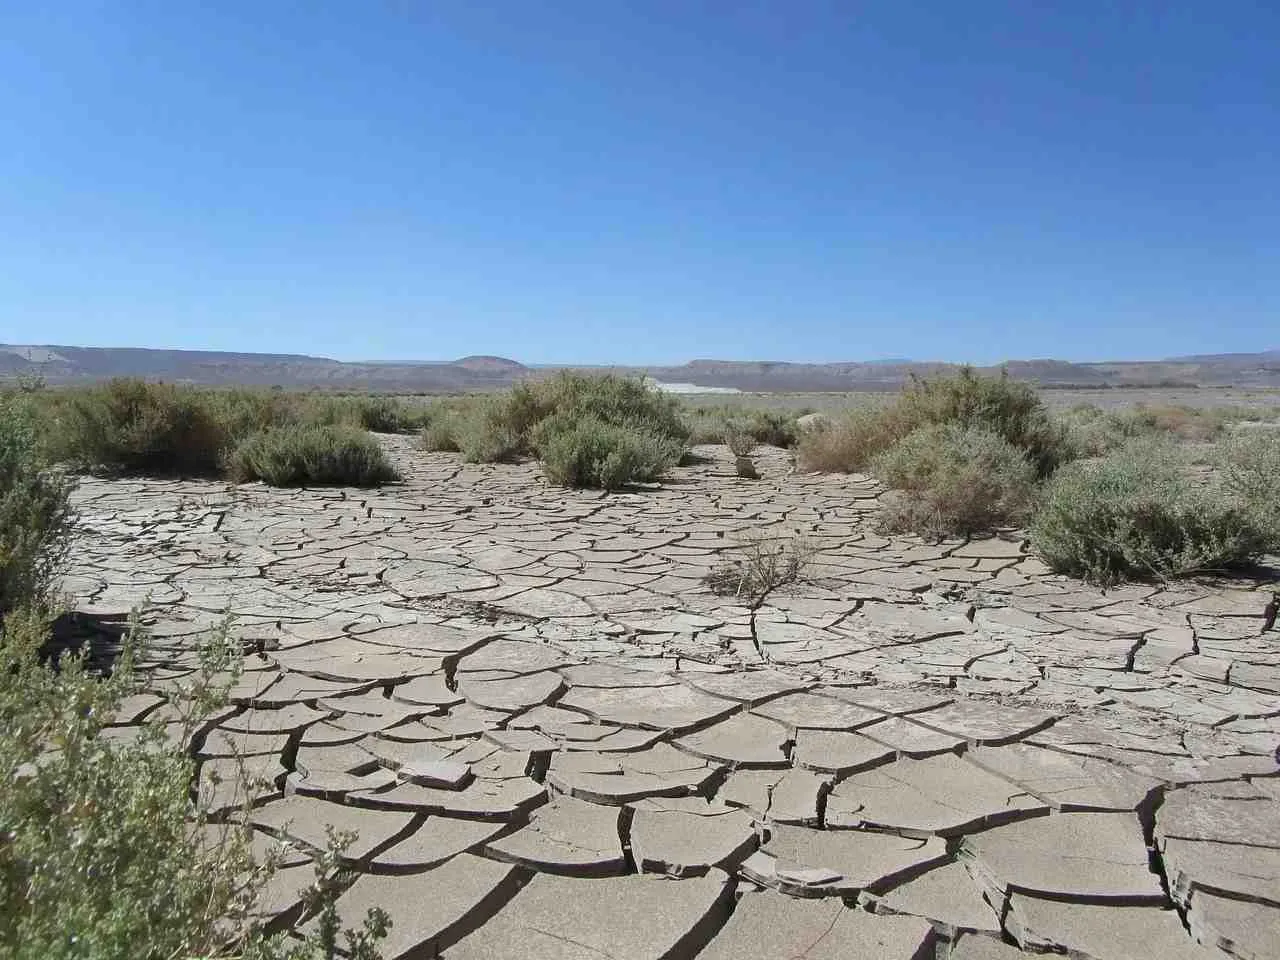 Read Atacama desert facts to learn more about the driest desert in the world!